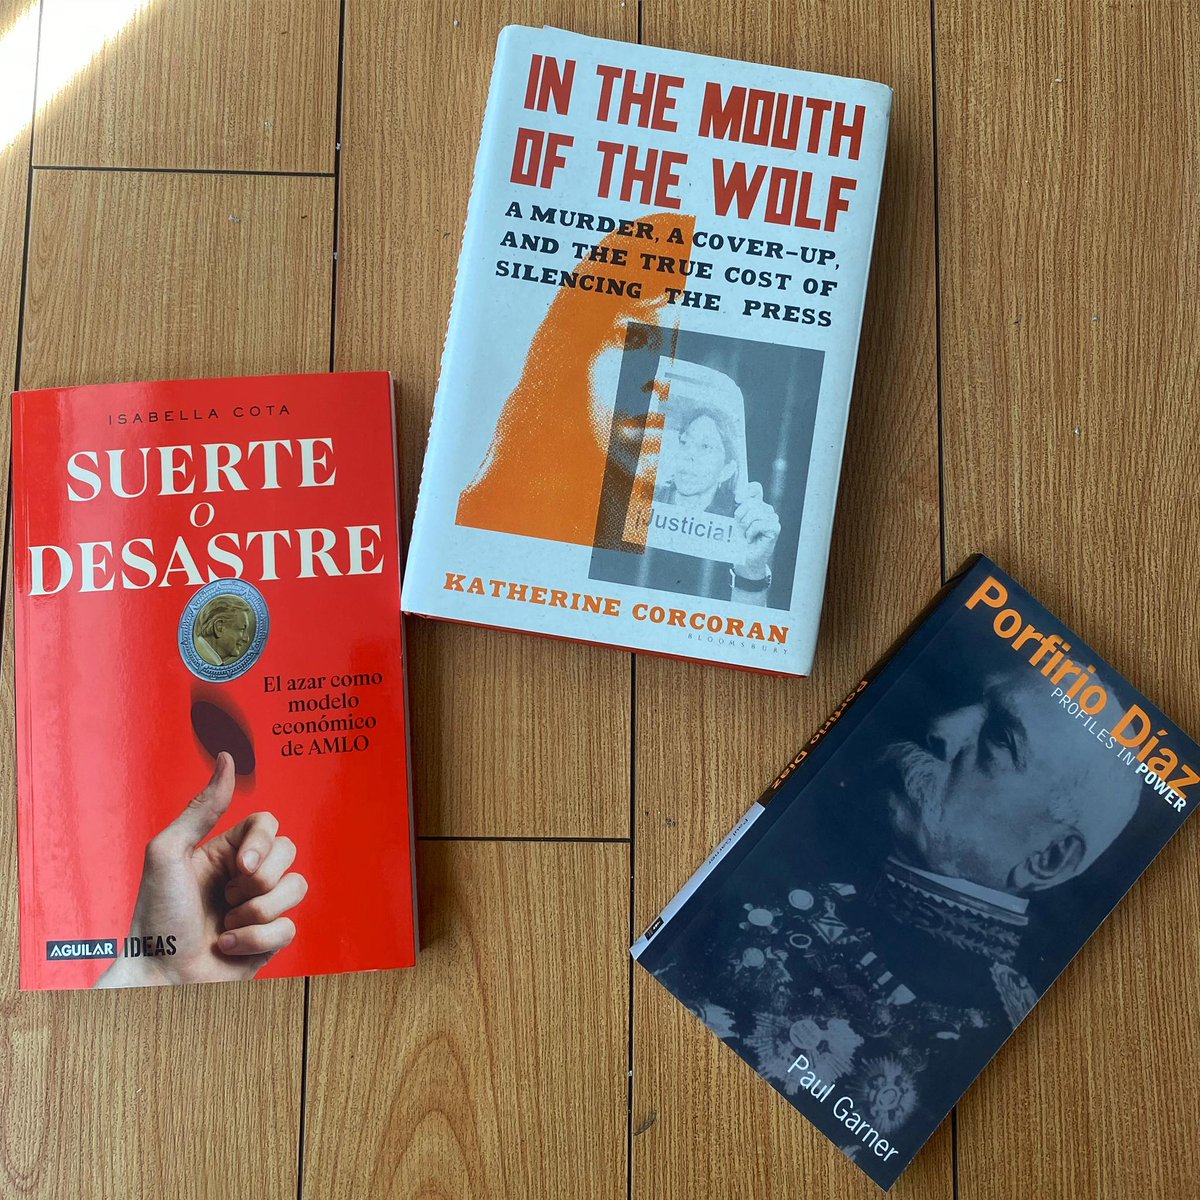 🇲🇽📚📖 The next few Mexico books I'm reading: @Isabella_CS's new book on Mexico's economy under AMLO, @kathycorcoran's book looking at journalist killings in Mexico, and Paul Garner's book about Porfirio Diaz.